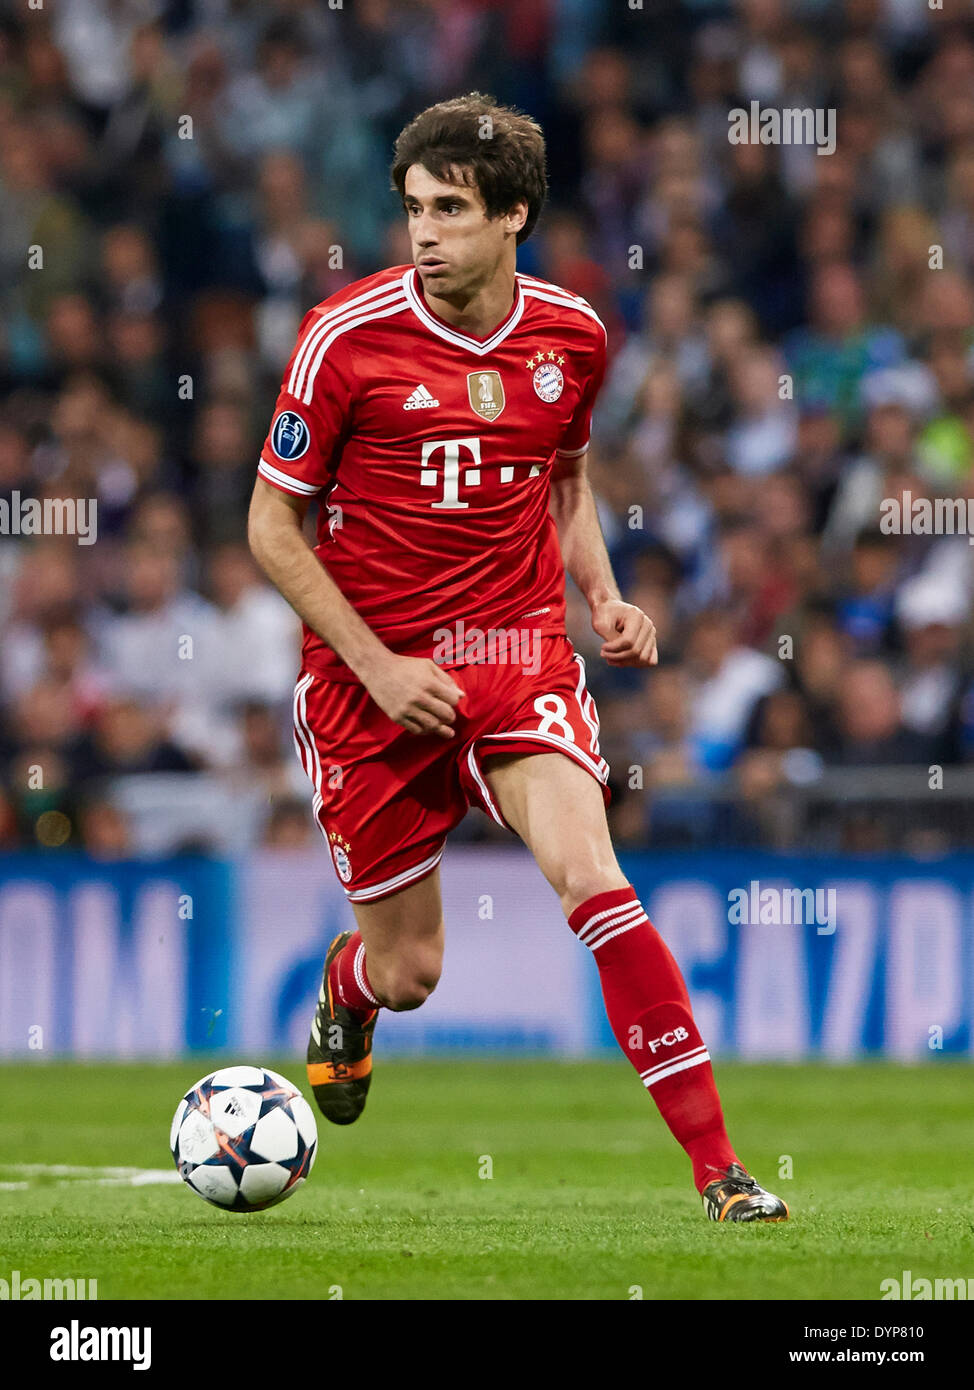 Madrid, Spain. 23rd Apr, 2014. Javi MARTINEZ in action during the UEFA Champions League Game between Real Madrid and FC Bayern Munich at Santiago Bernabeu Stadium, Valencia Credit:  Action Plus Sports/Alamy Live News Stock Photo